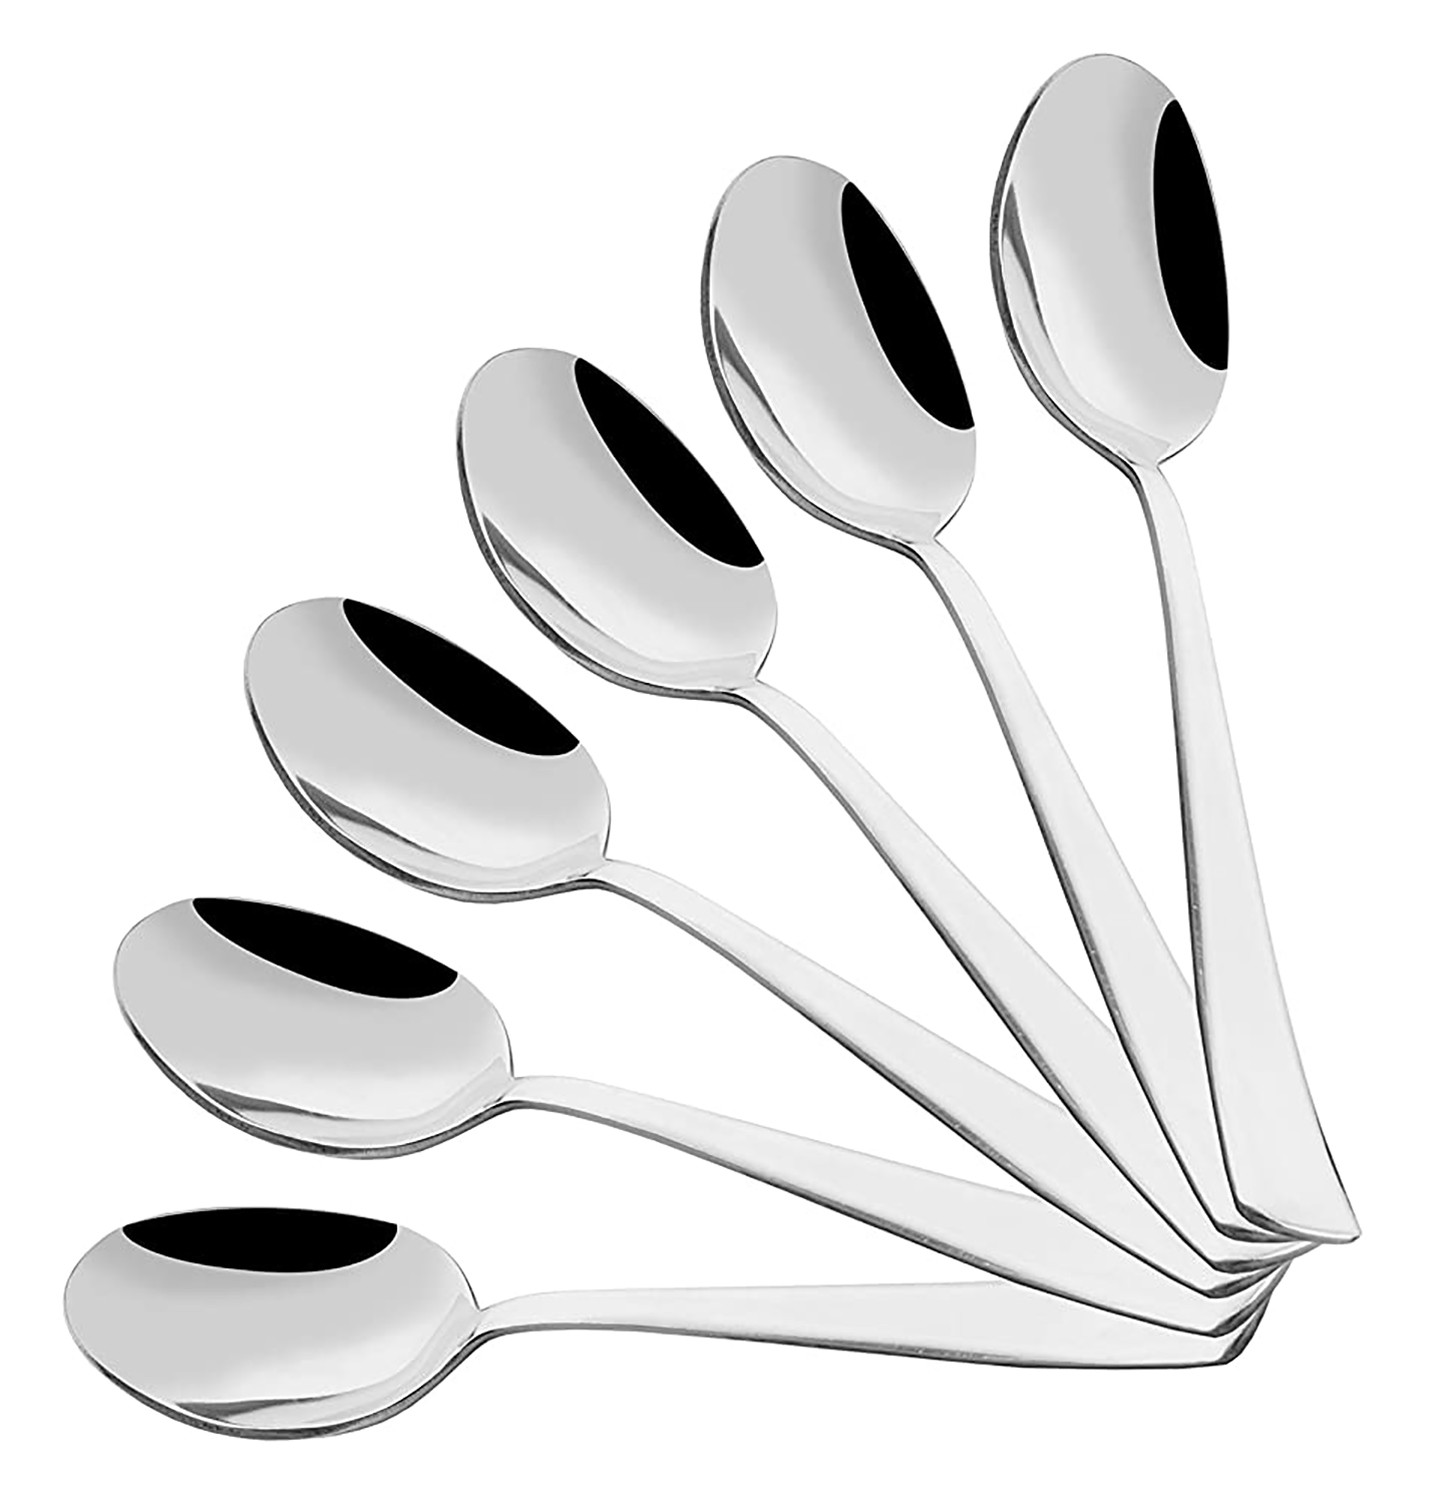 Kuber Industries Stainless Steel Dinner Spoons Set With Plastic Handle For Home, Kitchen, or Restaurant (Silver)-HS43KUBMART26195